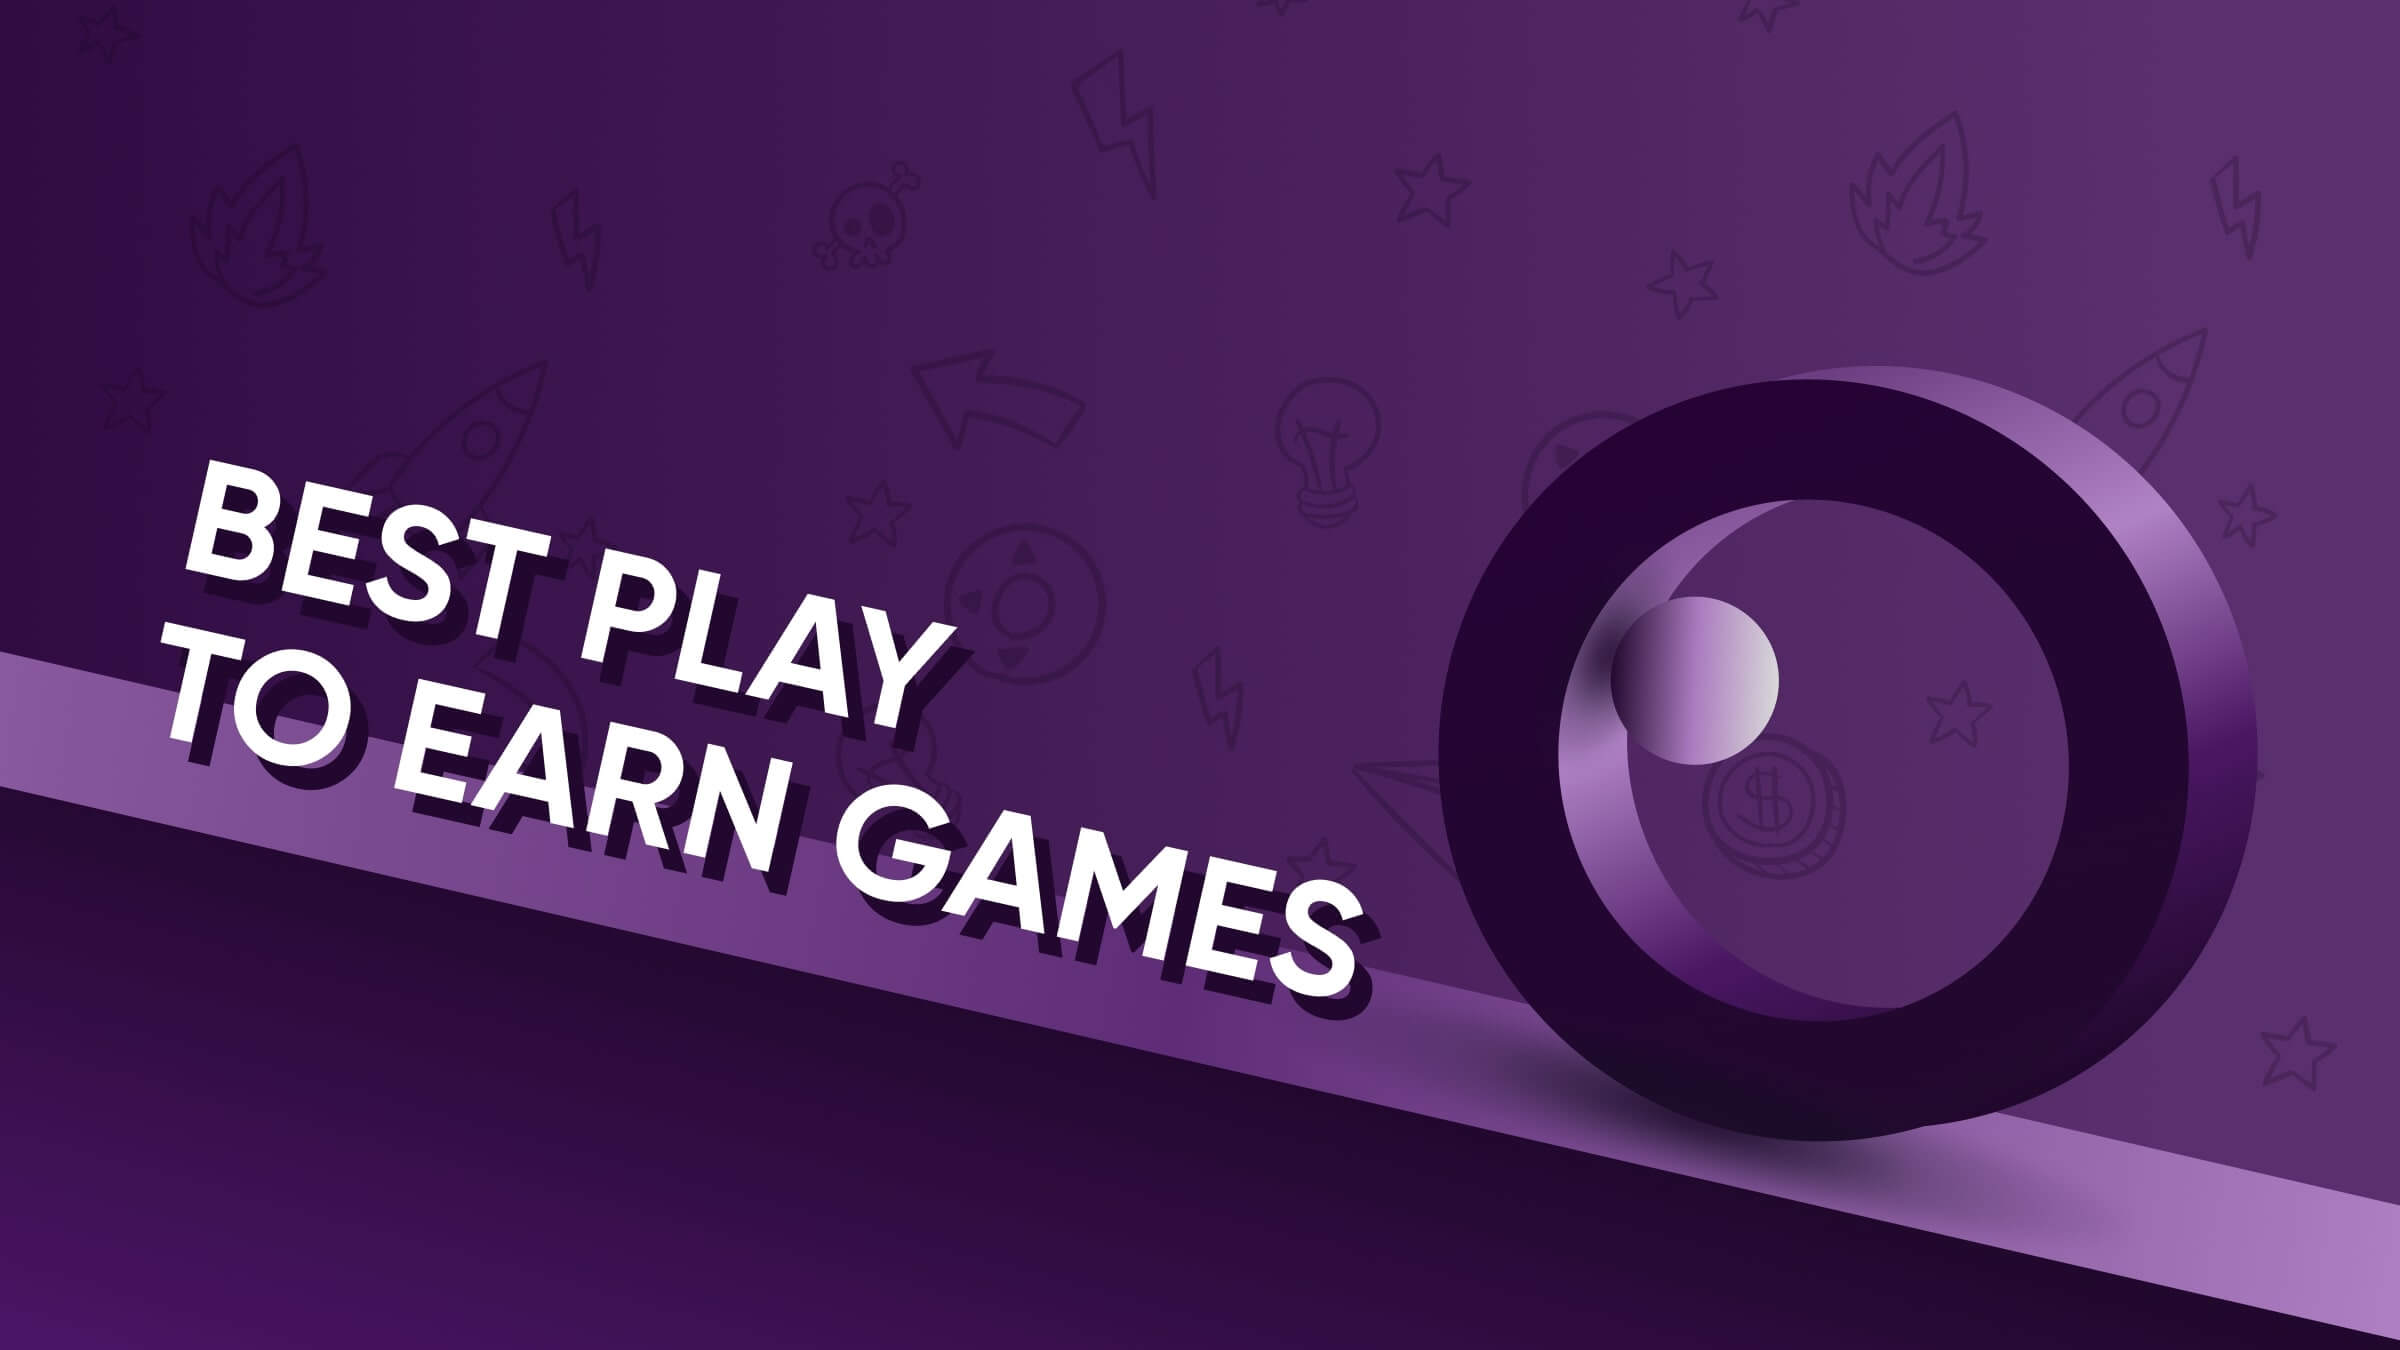 Reddit Founder On Crypto Games and More - Play to Earn Games News